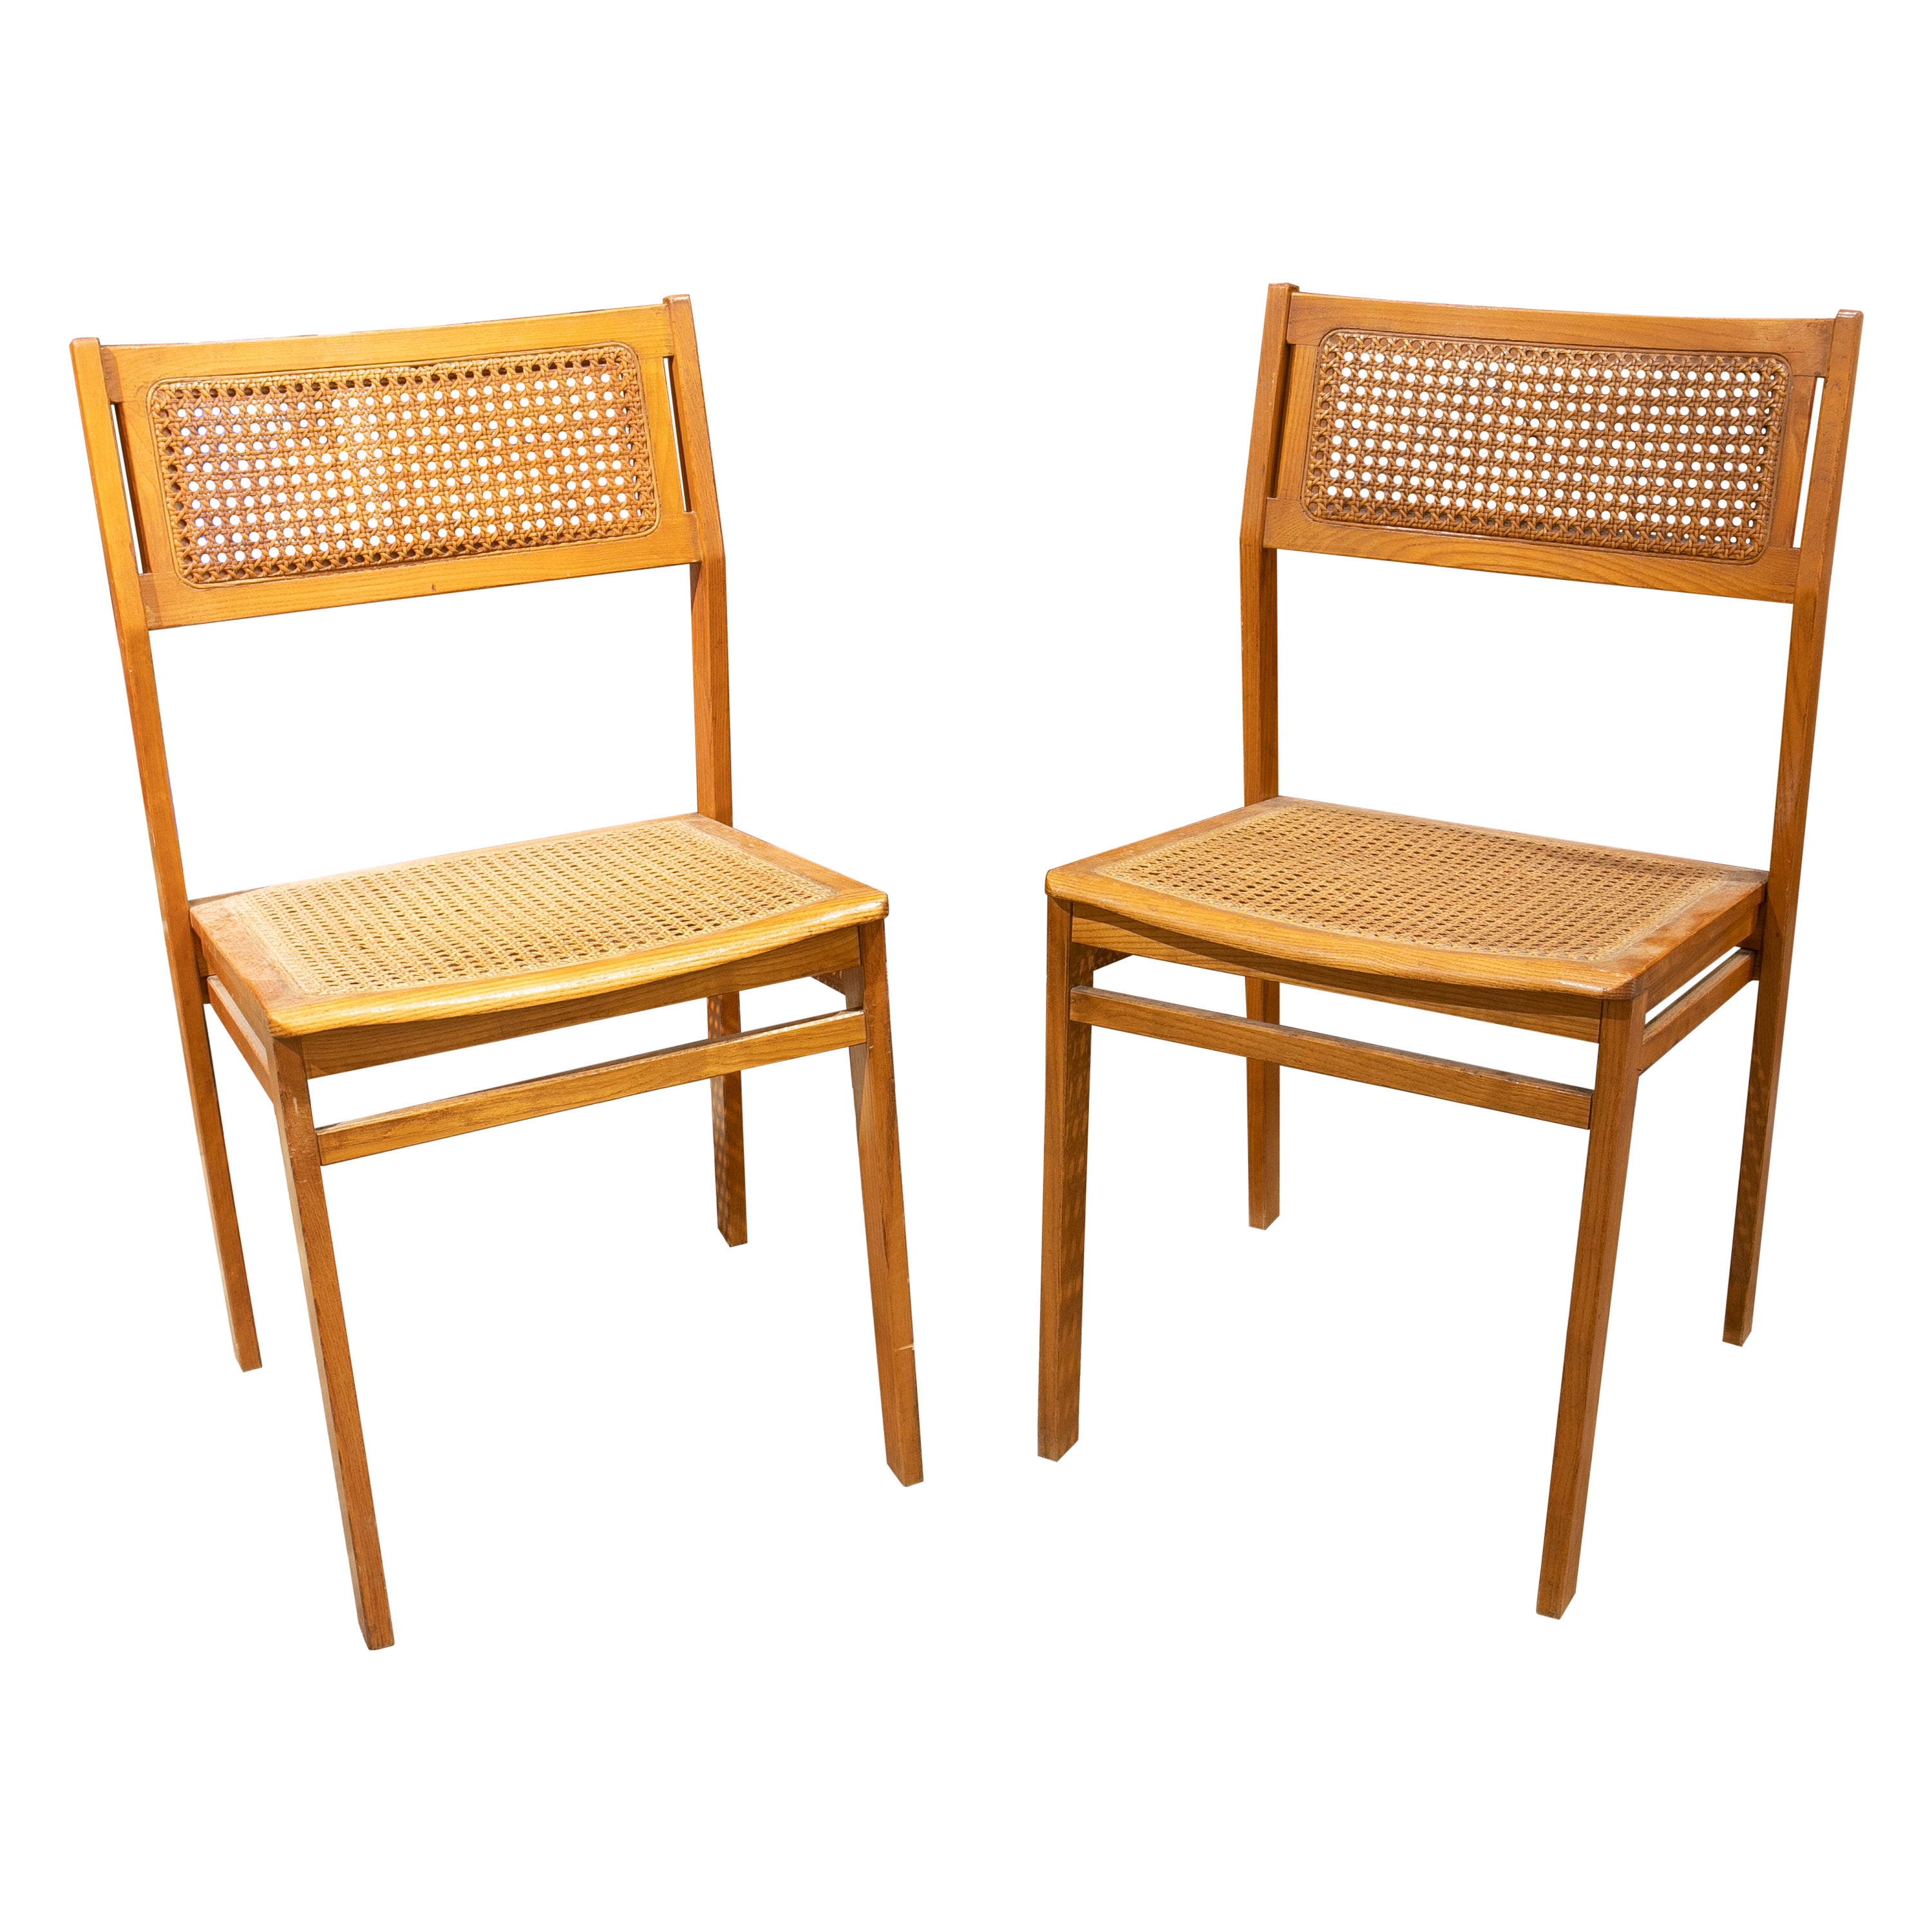 1970s Swedish Pair of Wooden Chairs with Wicker Seat and Back